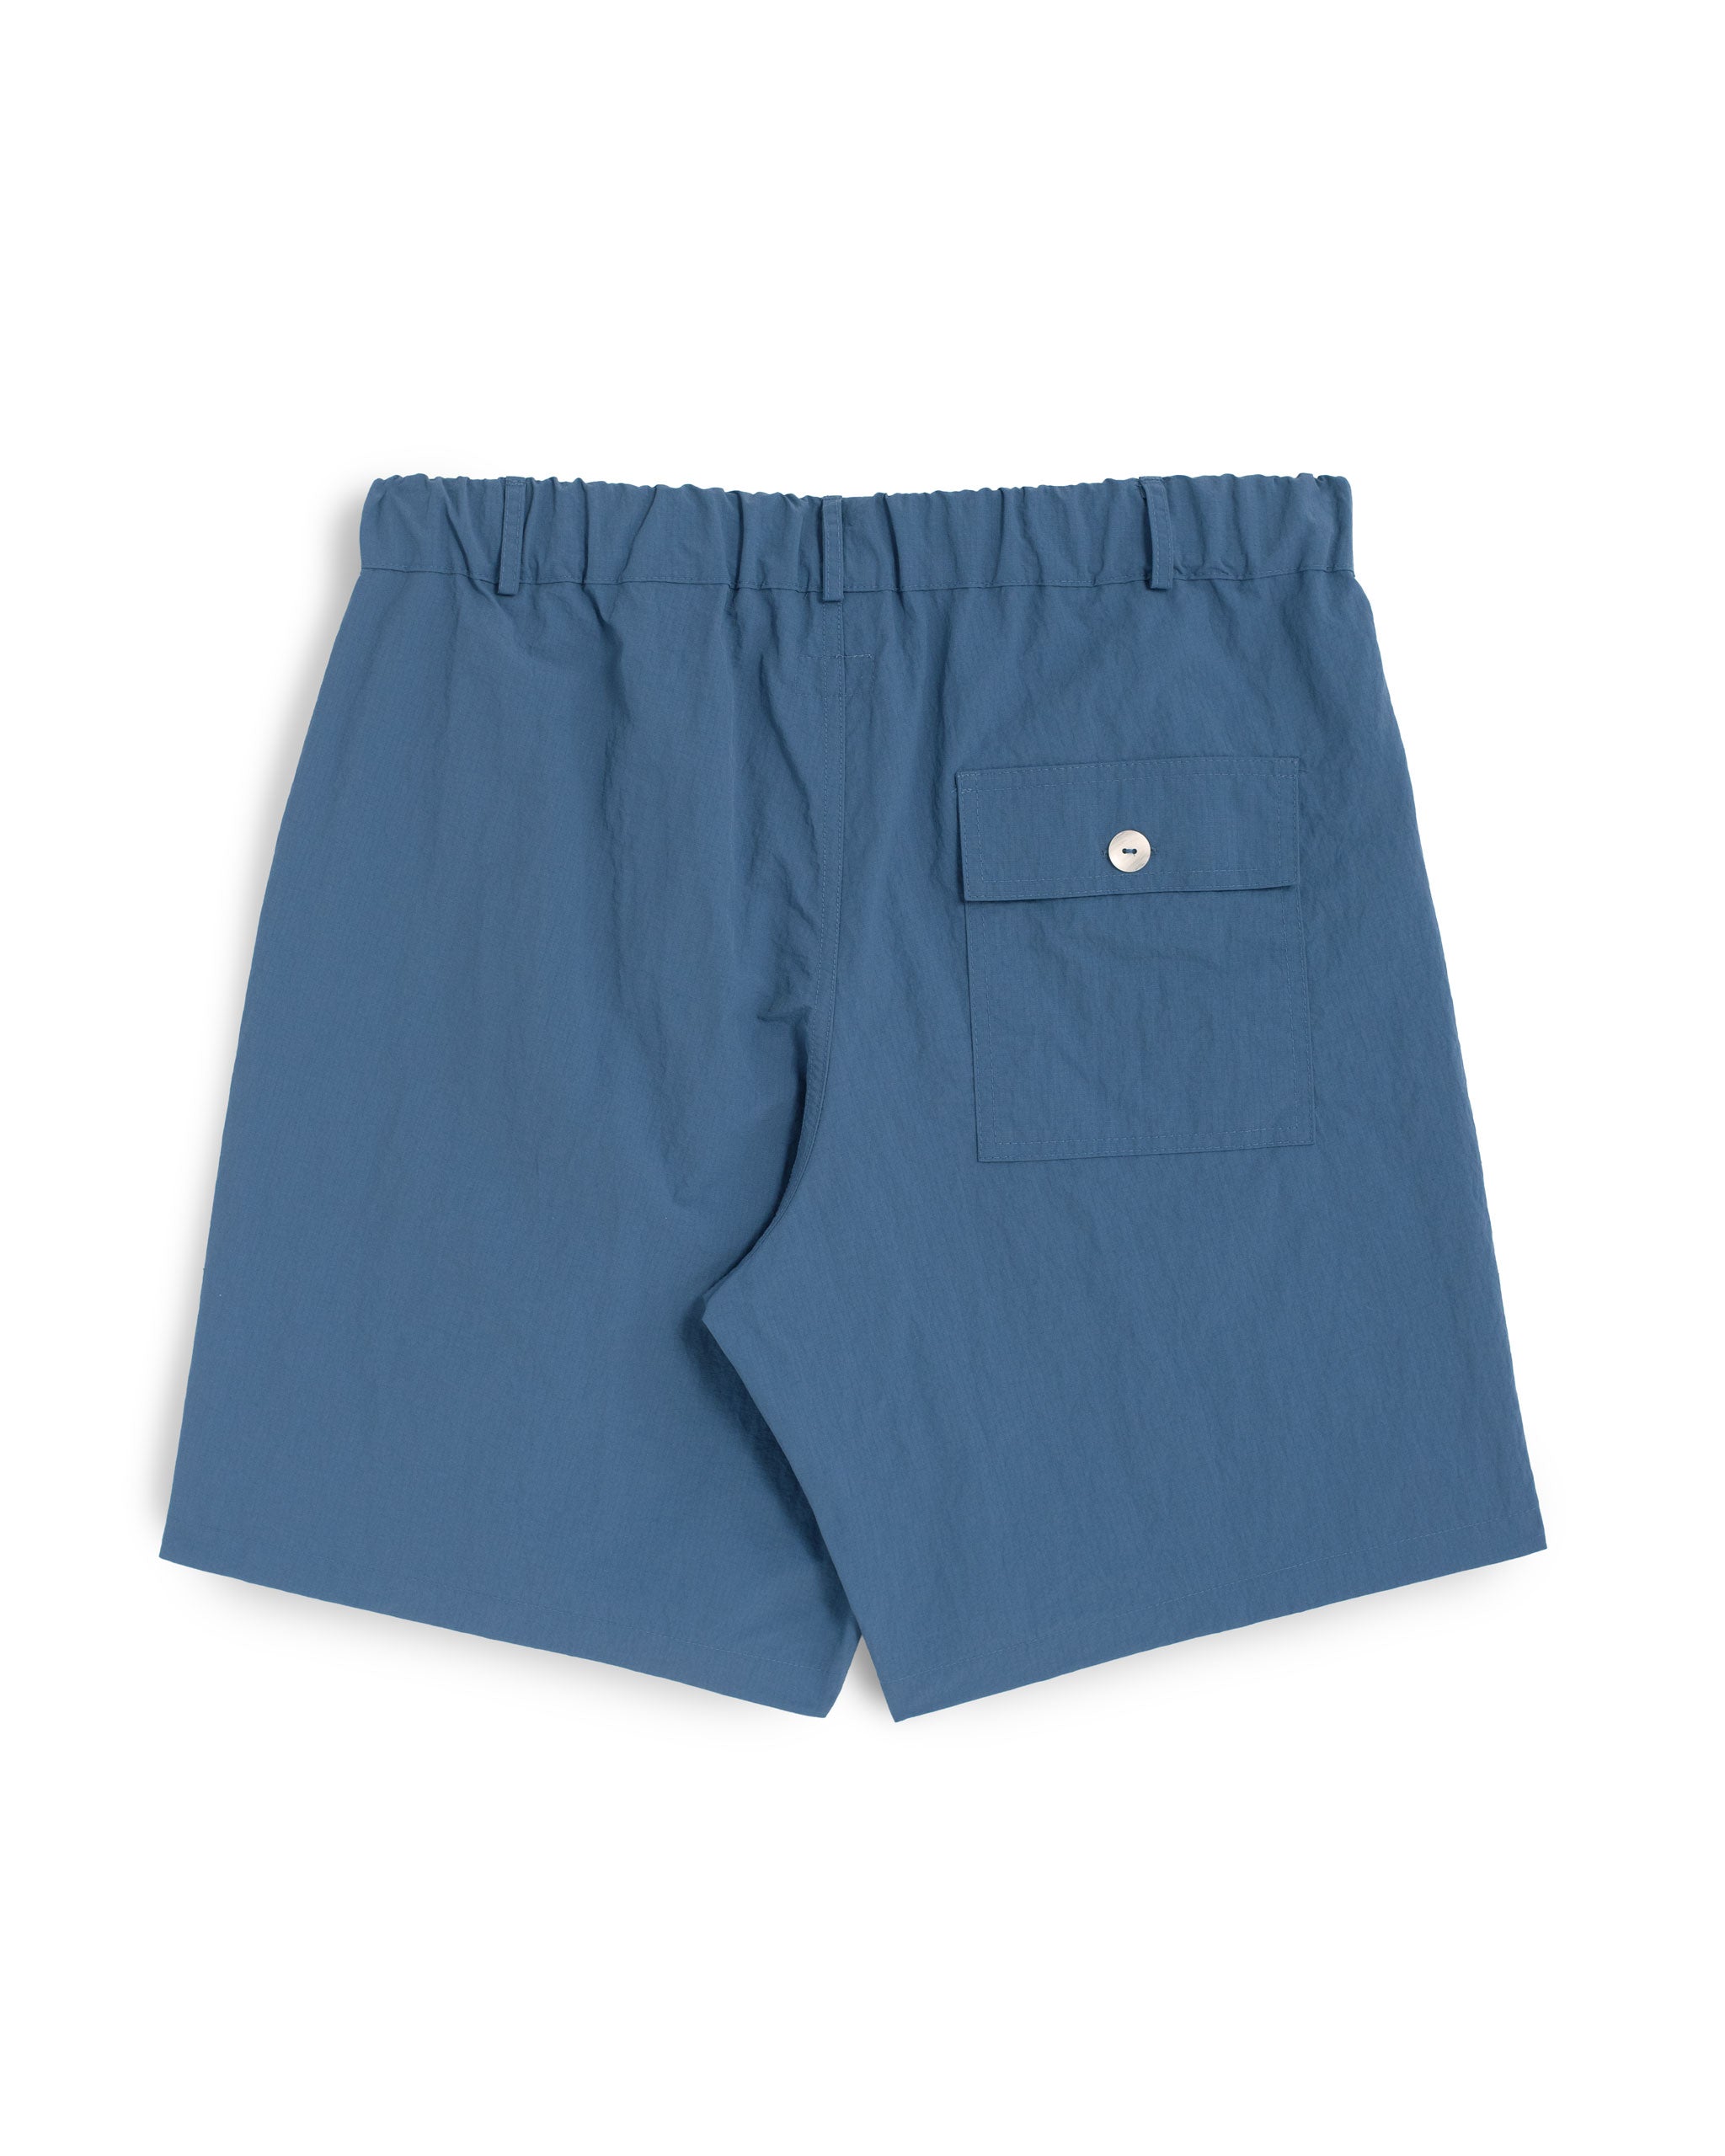 back shot of Solid blue utility shorts in ripstop nylon